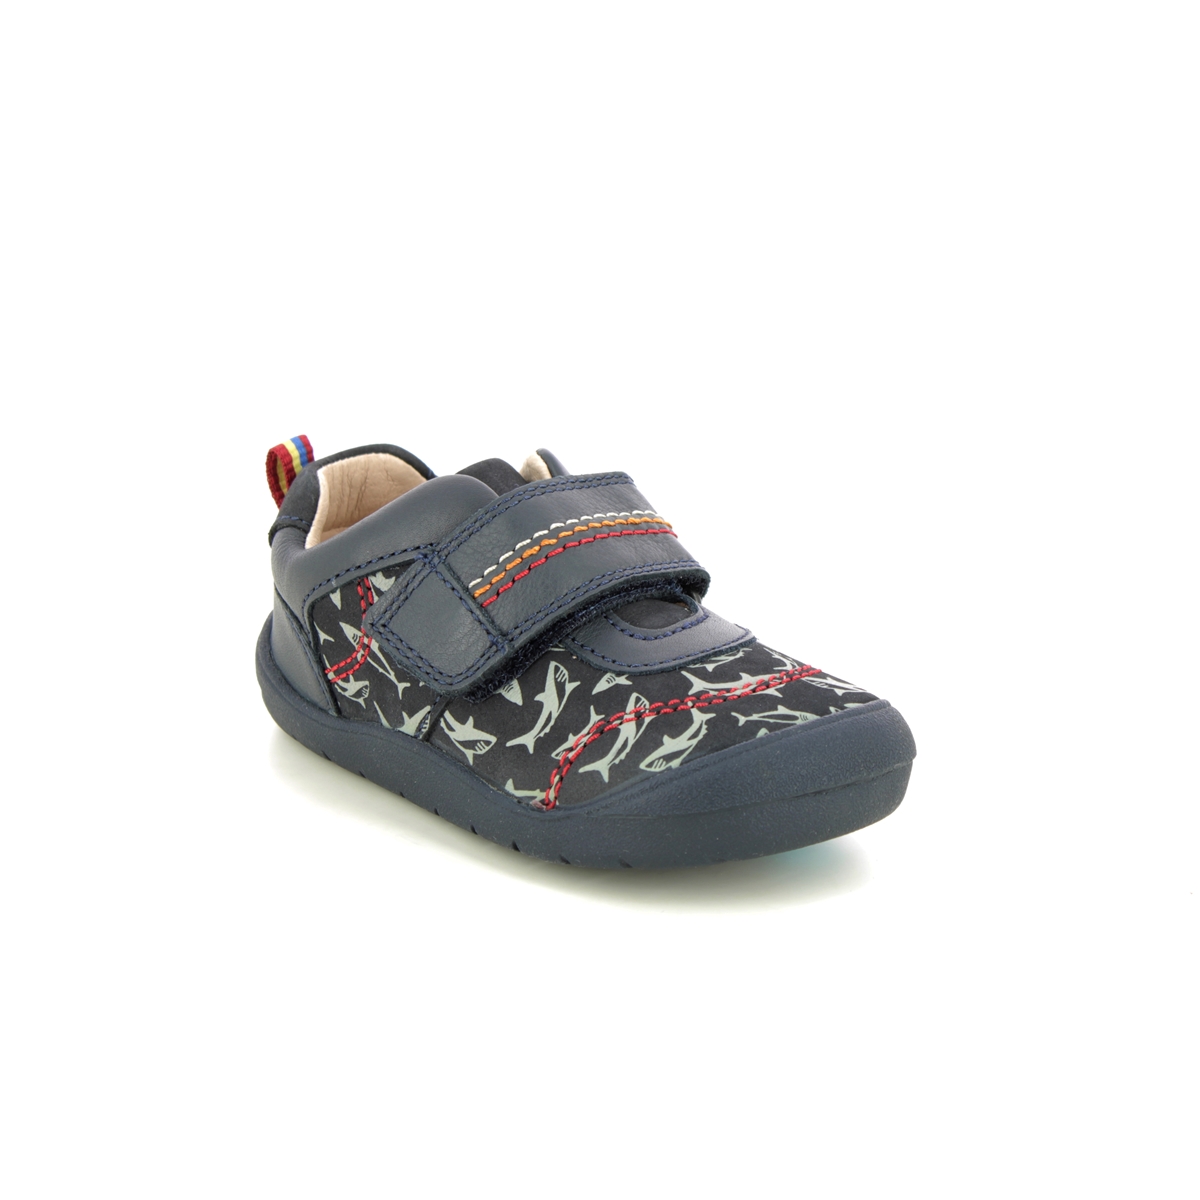 Start Rite Jaws Navy Nubuck Kids Boys Toddler Shoes 0782-96F in a Plain Leather in Size 6.5